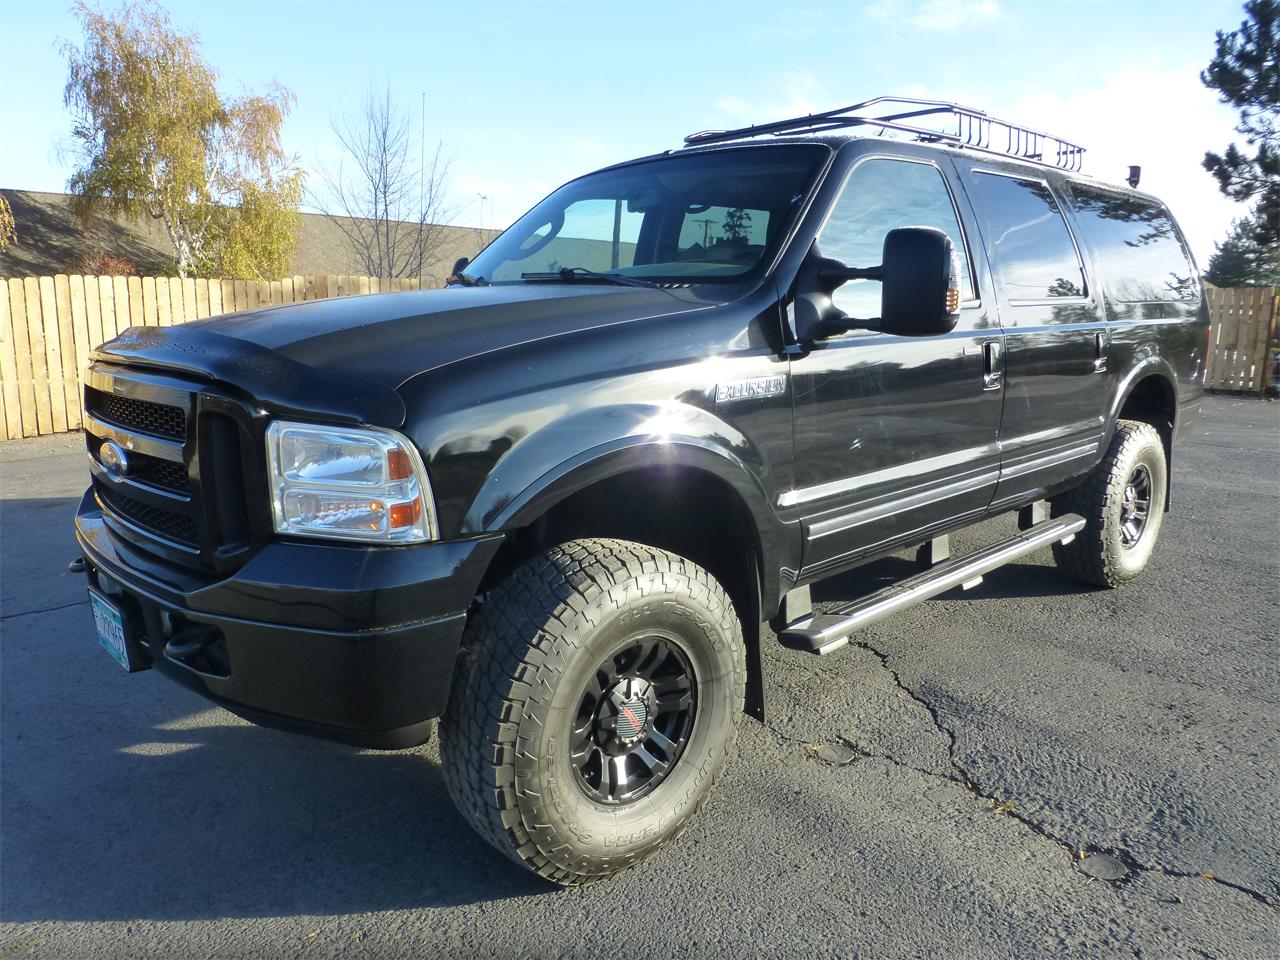 2005 ford excursion 7.3 diesel for sale